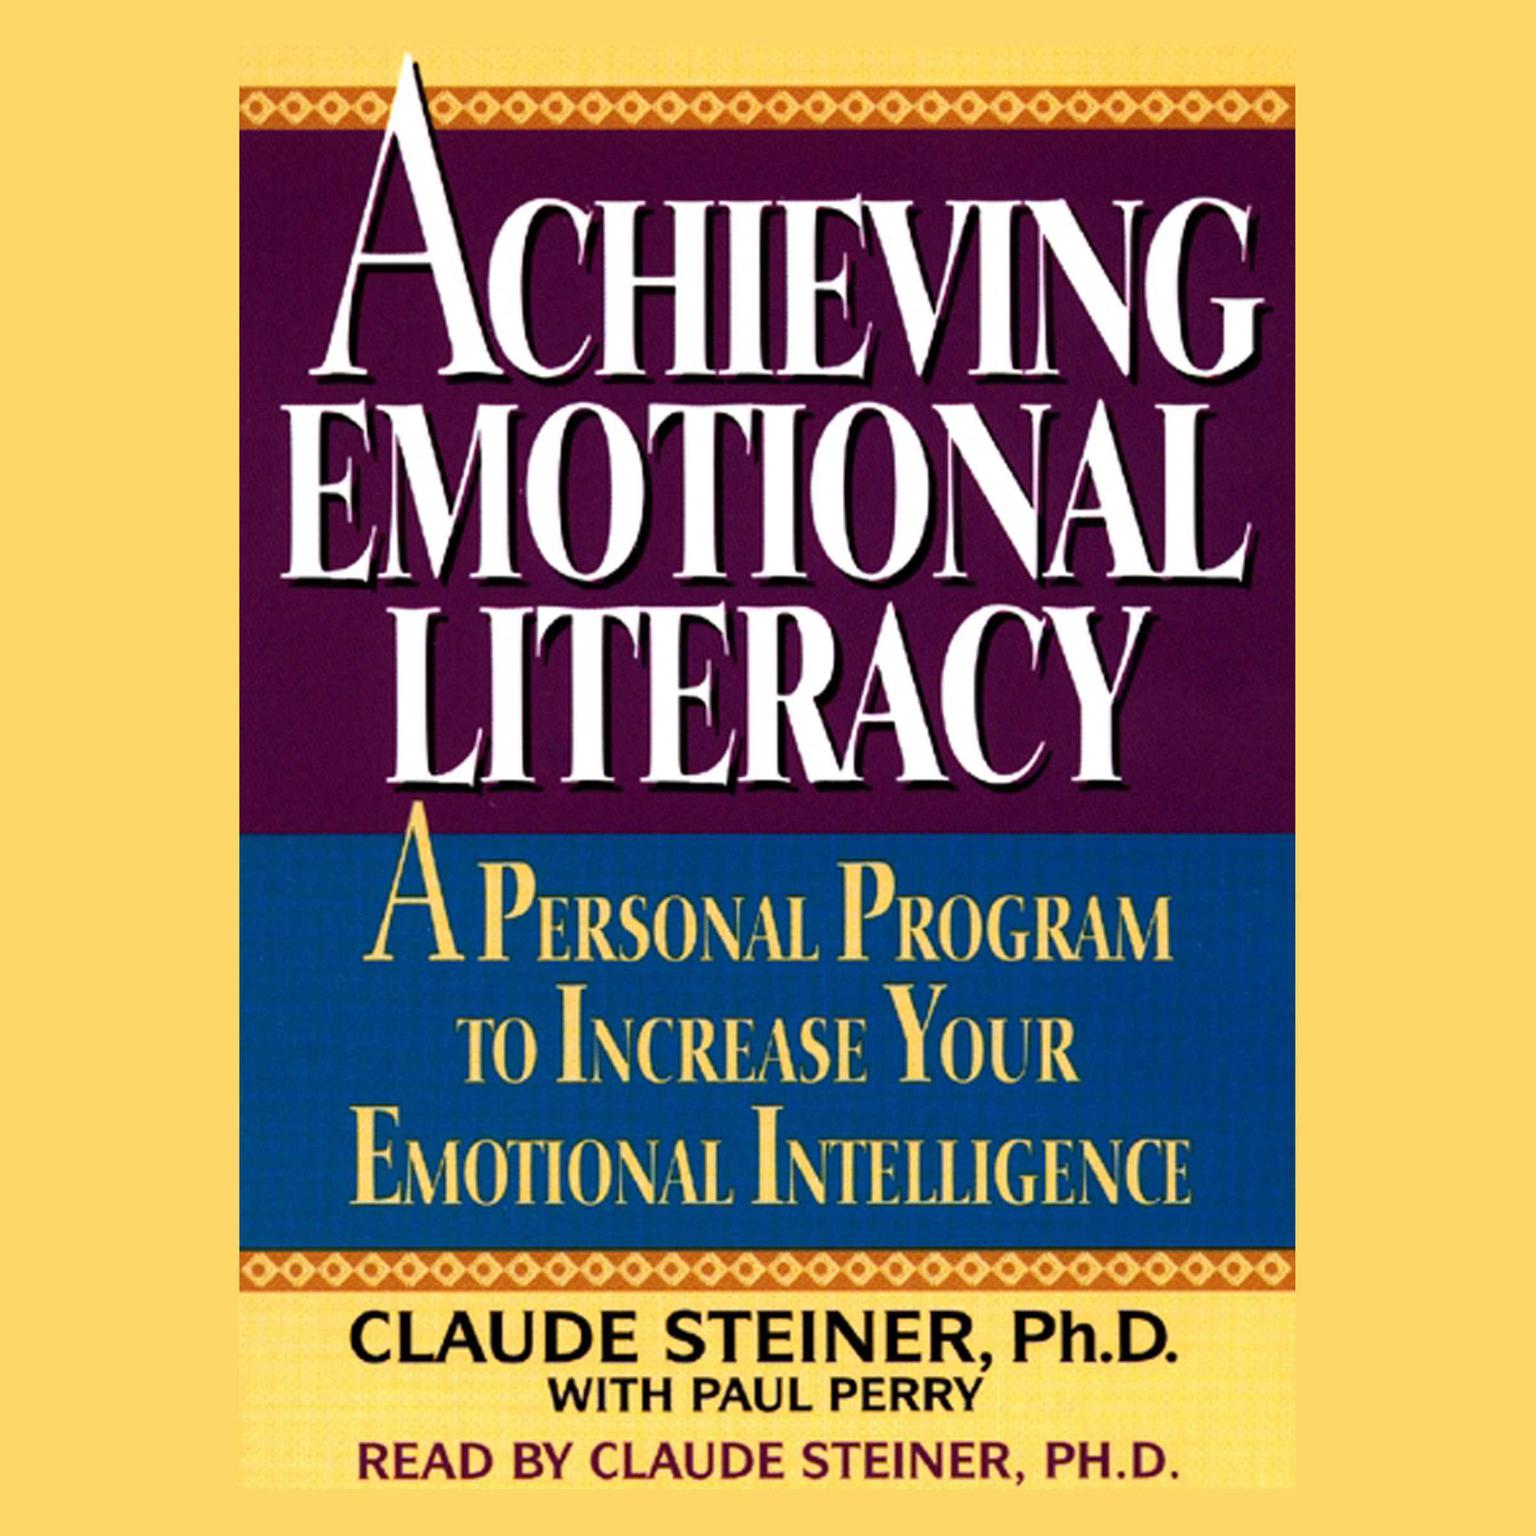 Achieving Emotional Literacy (Abridged): A Personal Program to Increase Your Emotional Intelligence Audiobook, by Claude Steiner